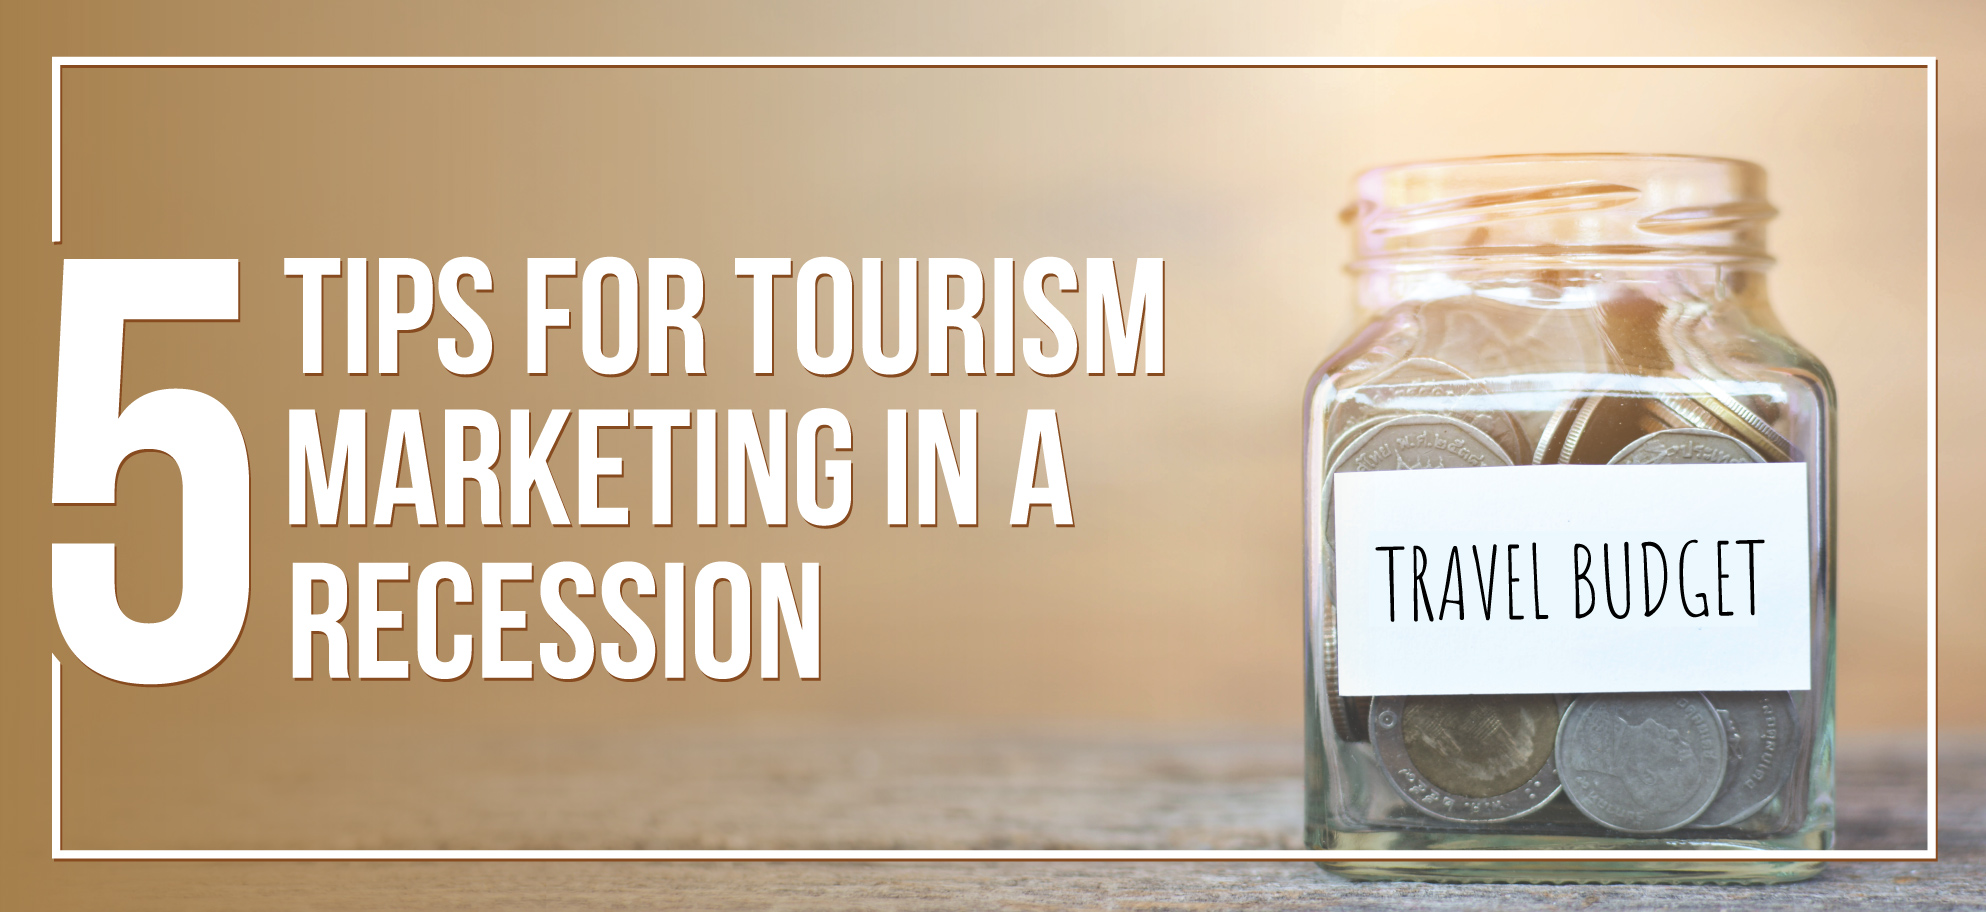 Tourism Marketing in a Recession